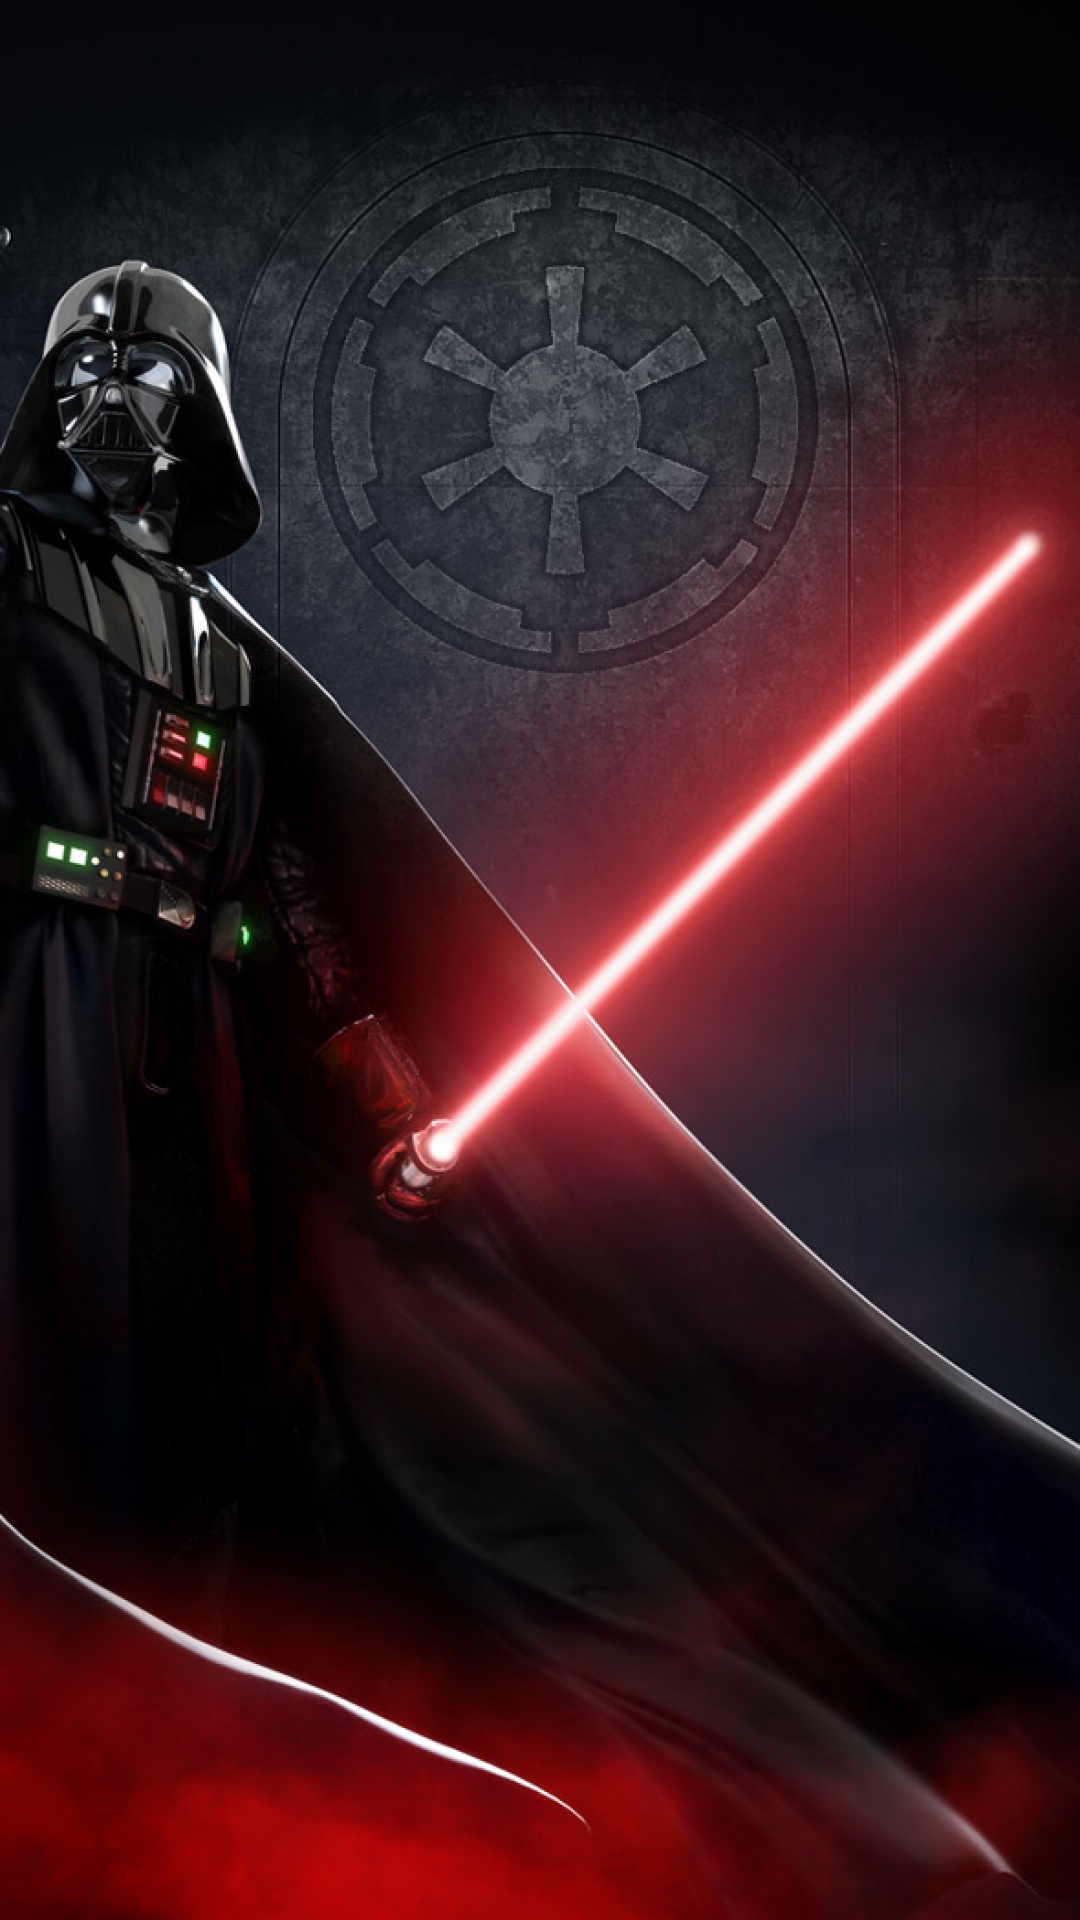 Star Wars Wallpaper For Android